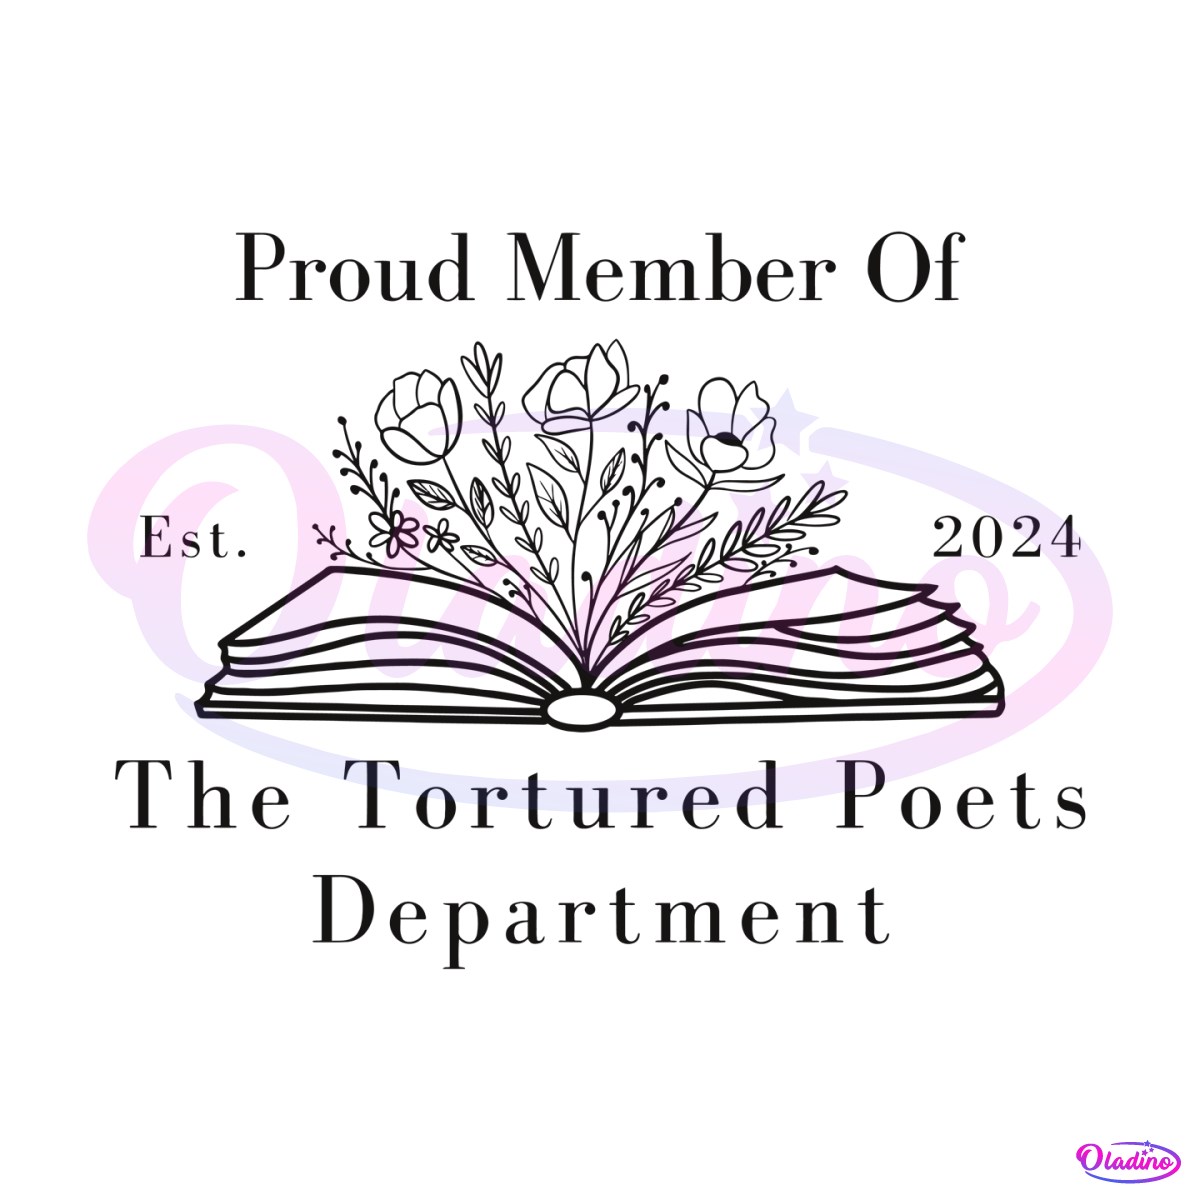 retro-pround-member-of-the-tortured-poets-department-svg